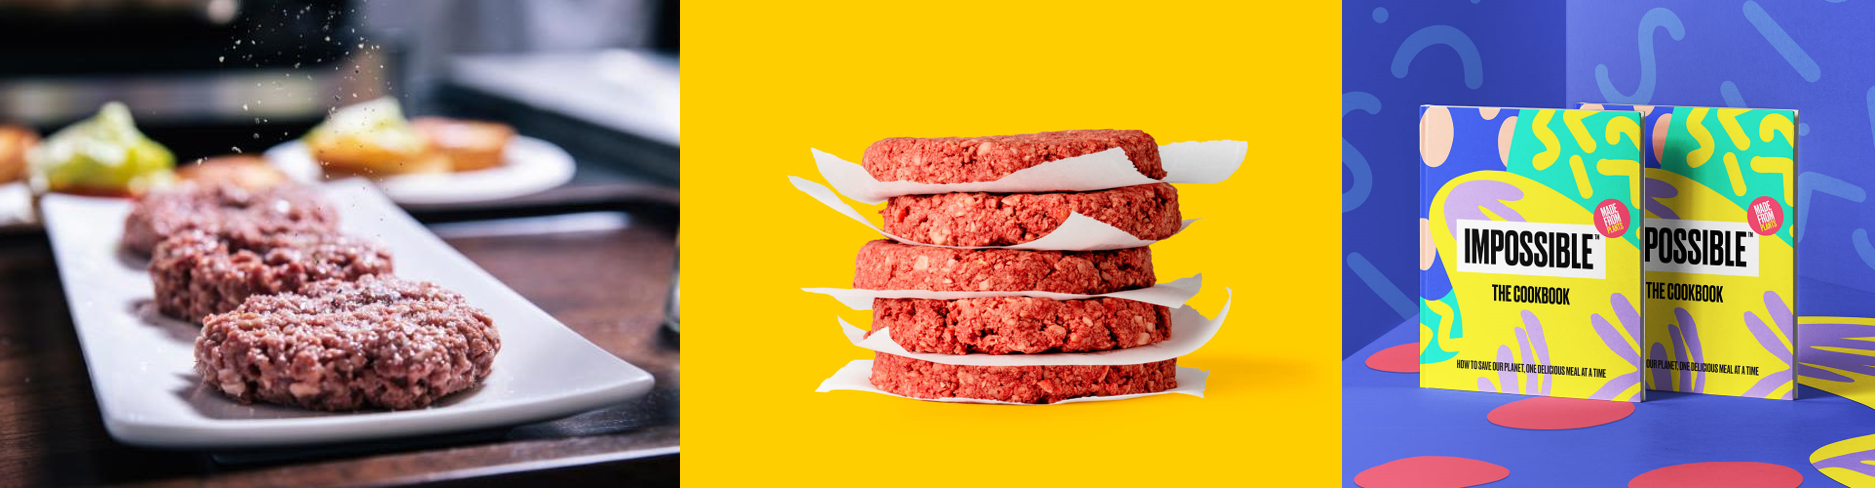 impossible foods 产品.png